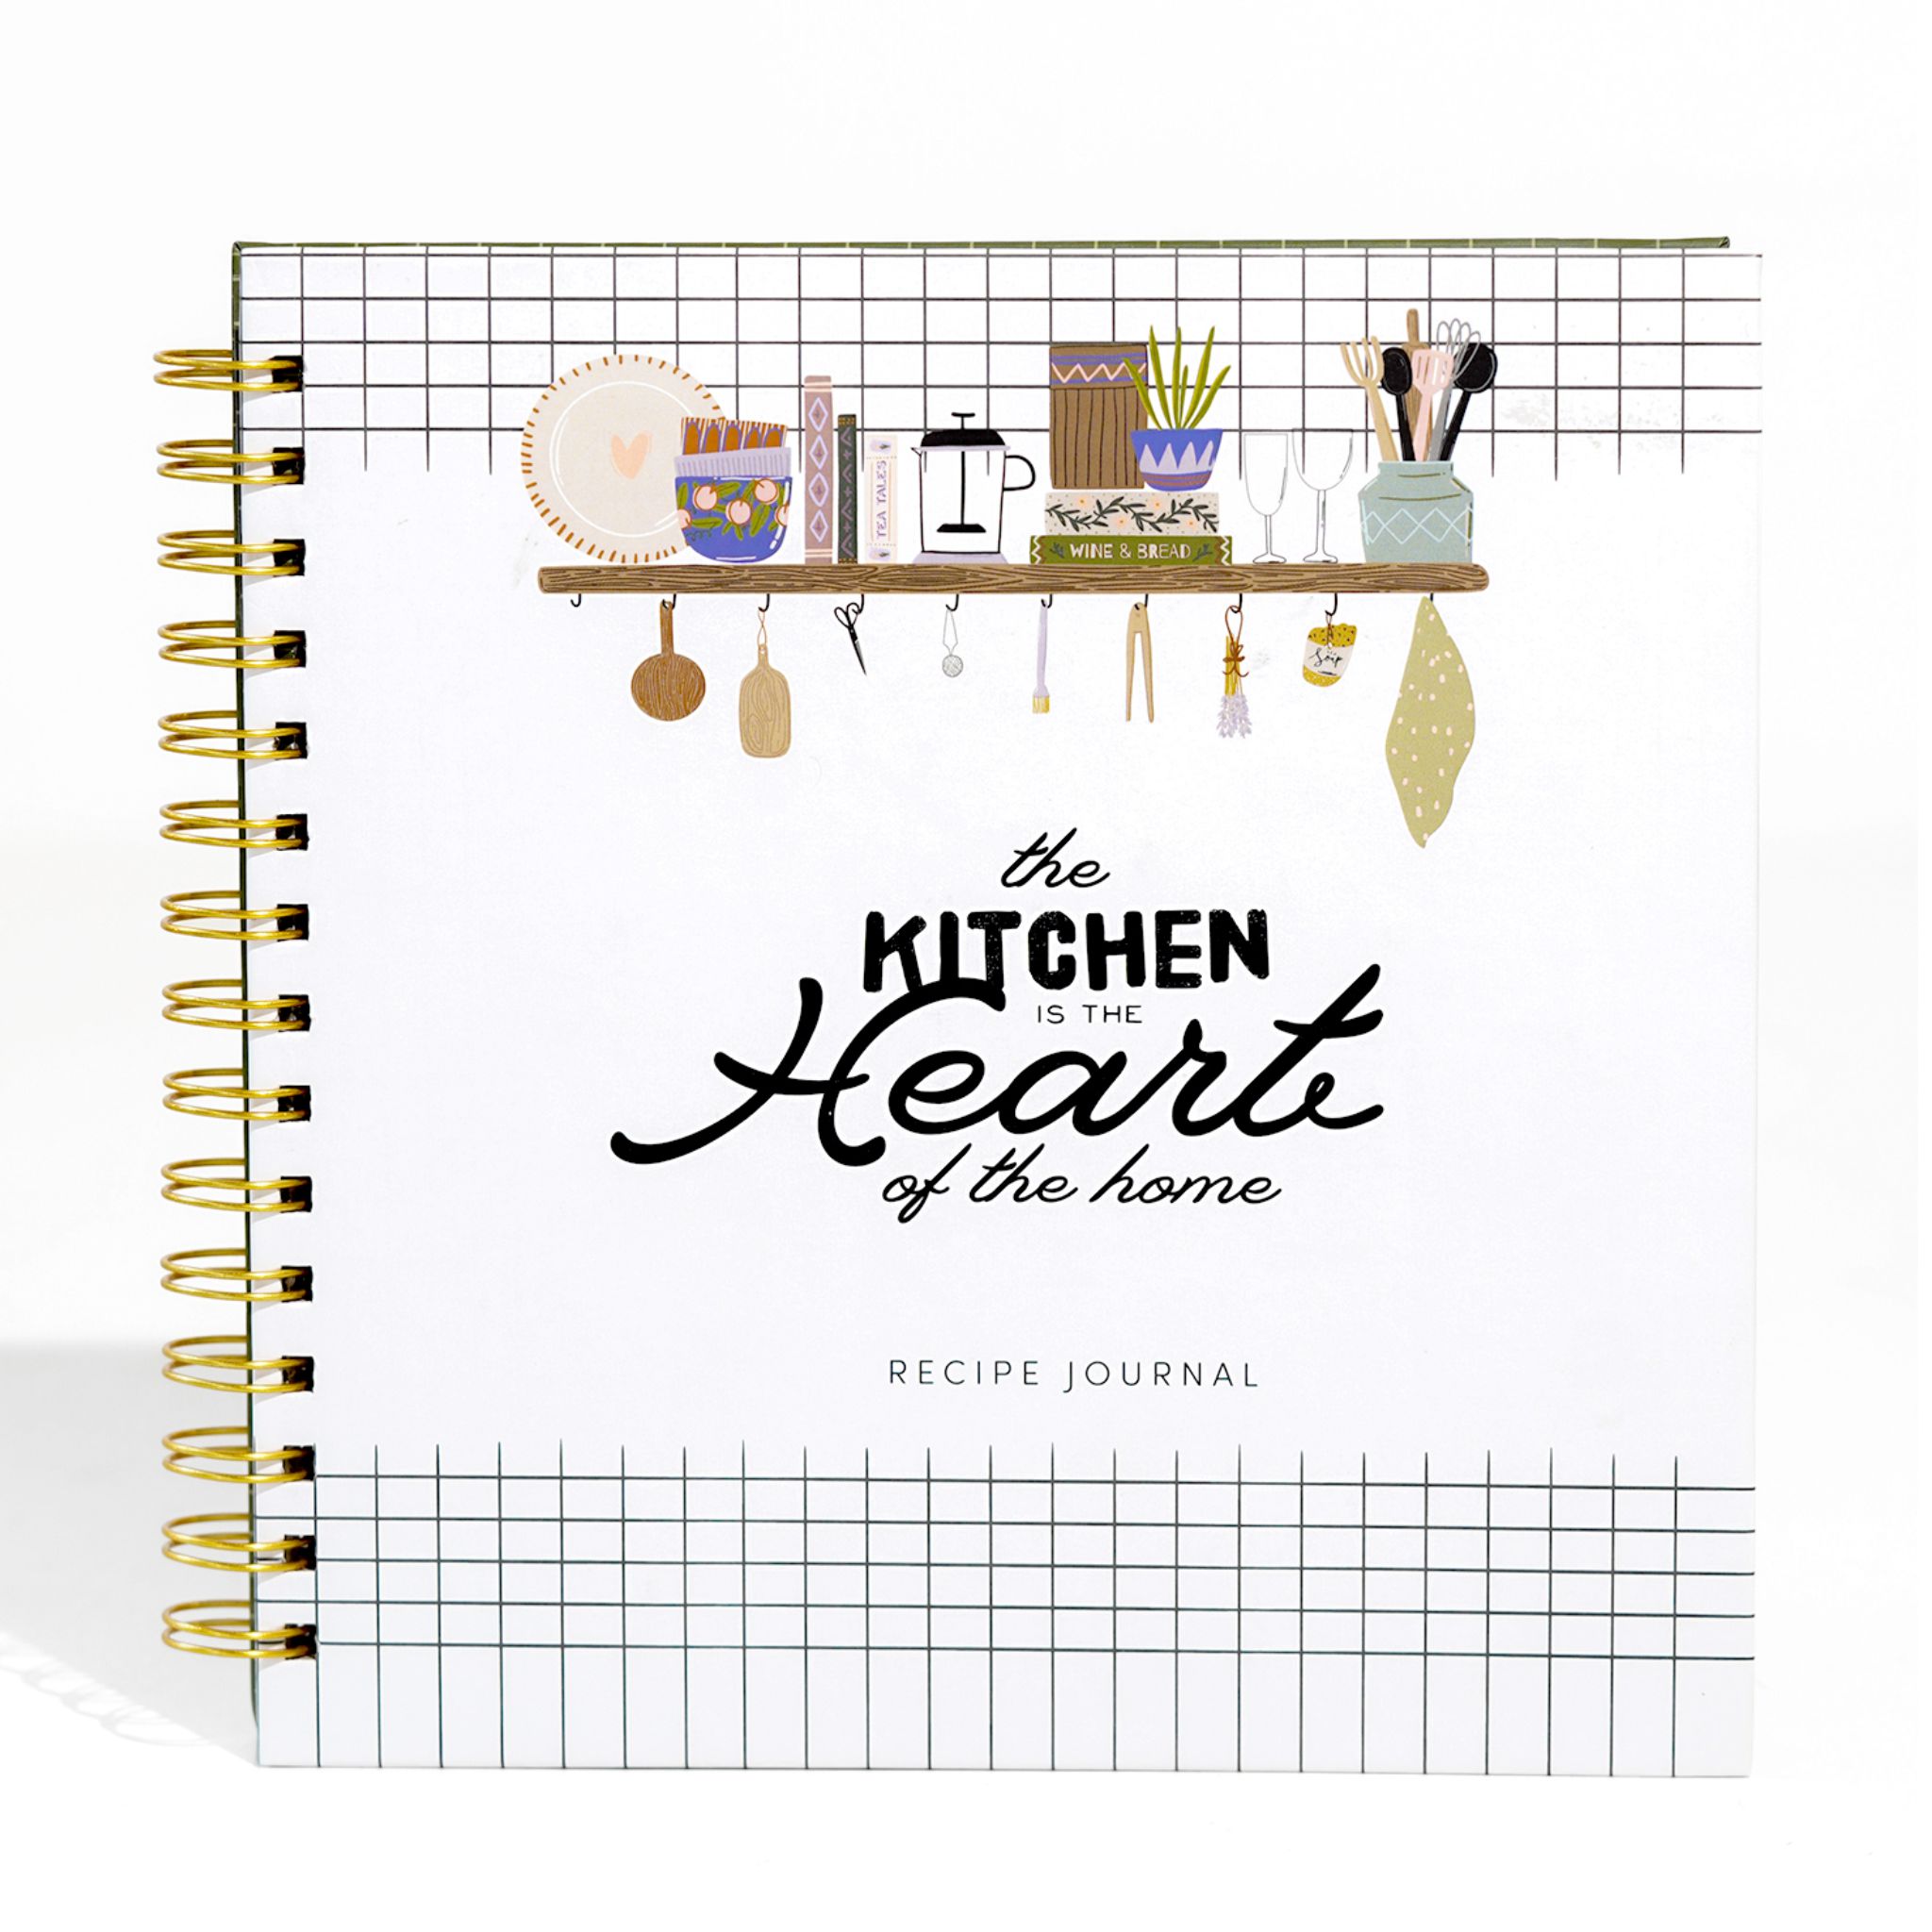 THE KITCHEN IS THE HEART OF THE HOME- RECIPE JOURNAL